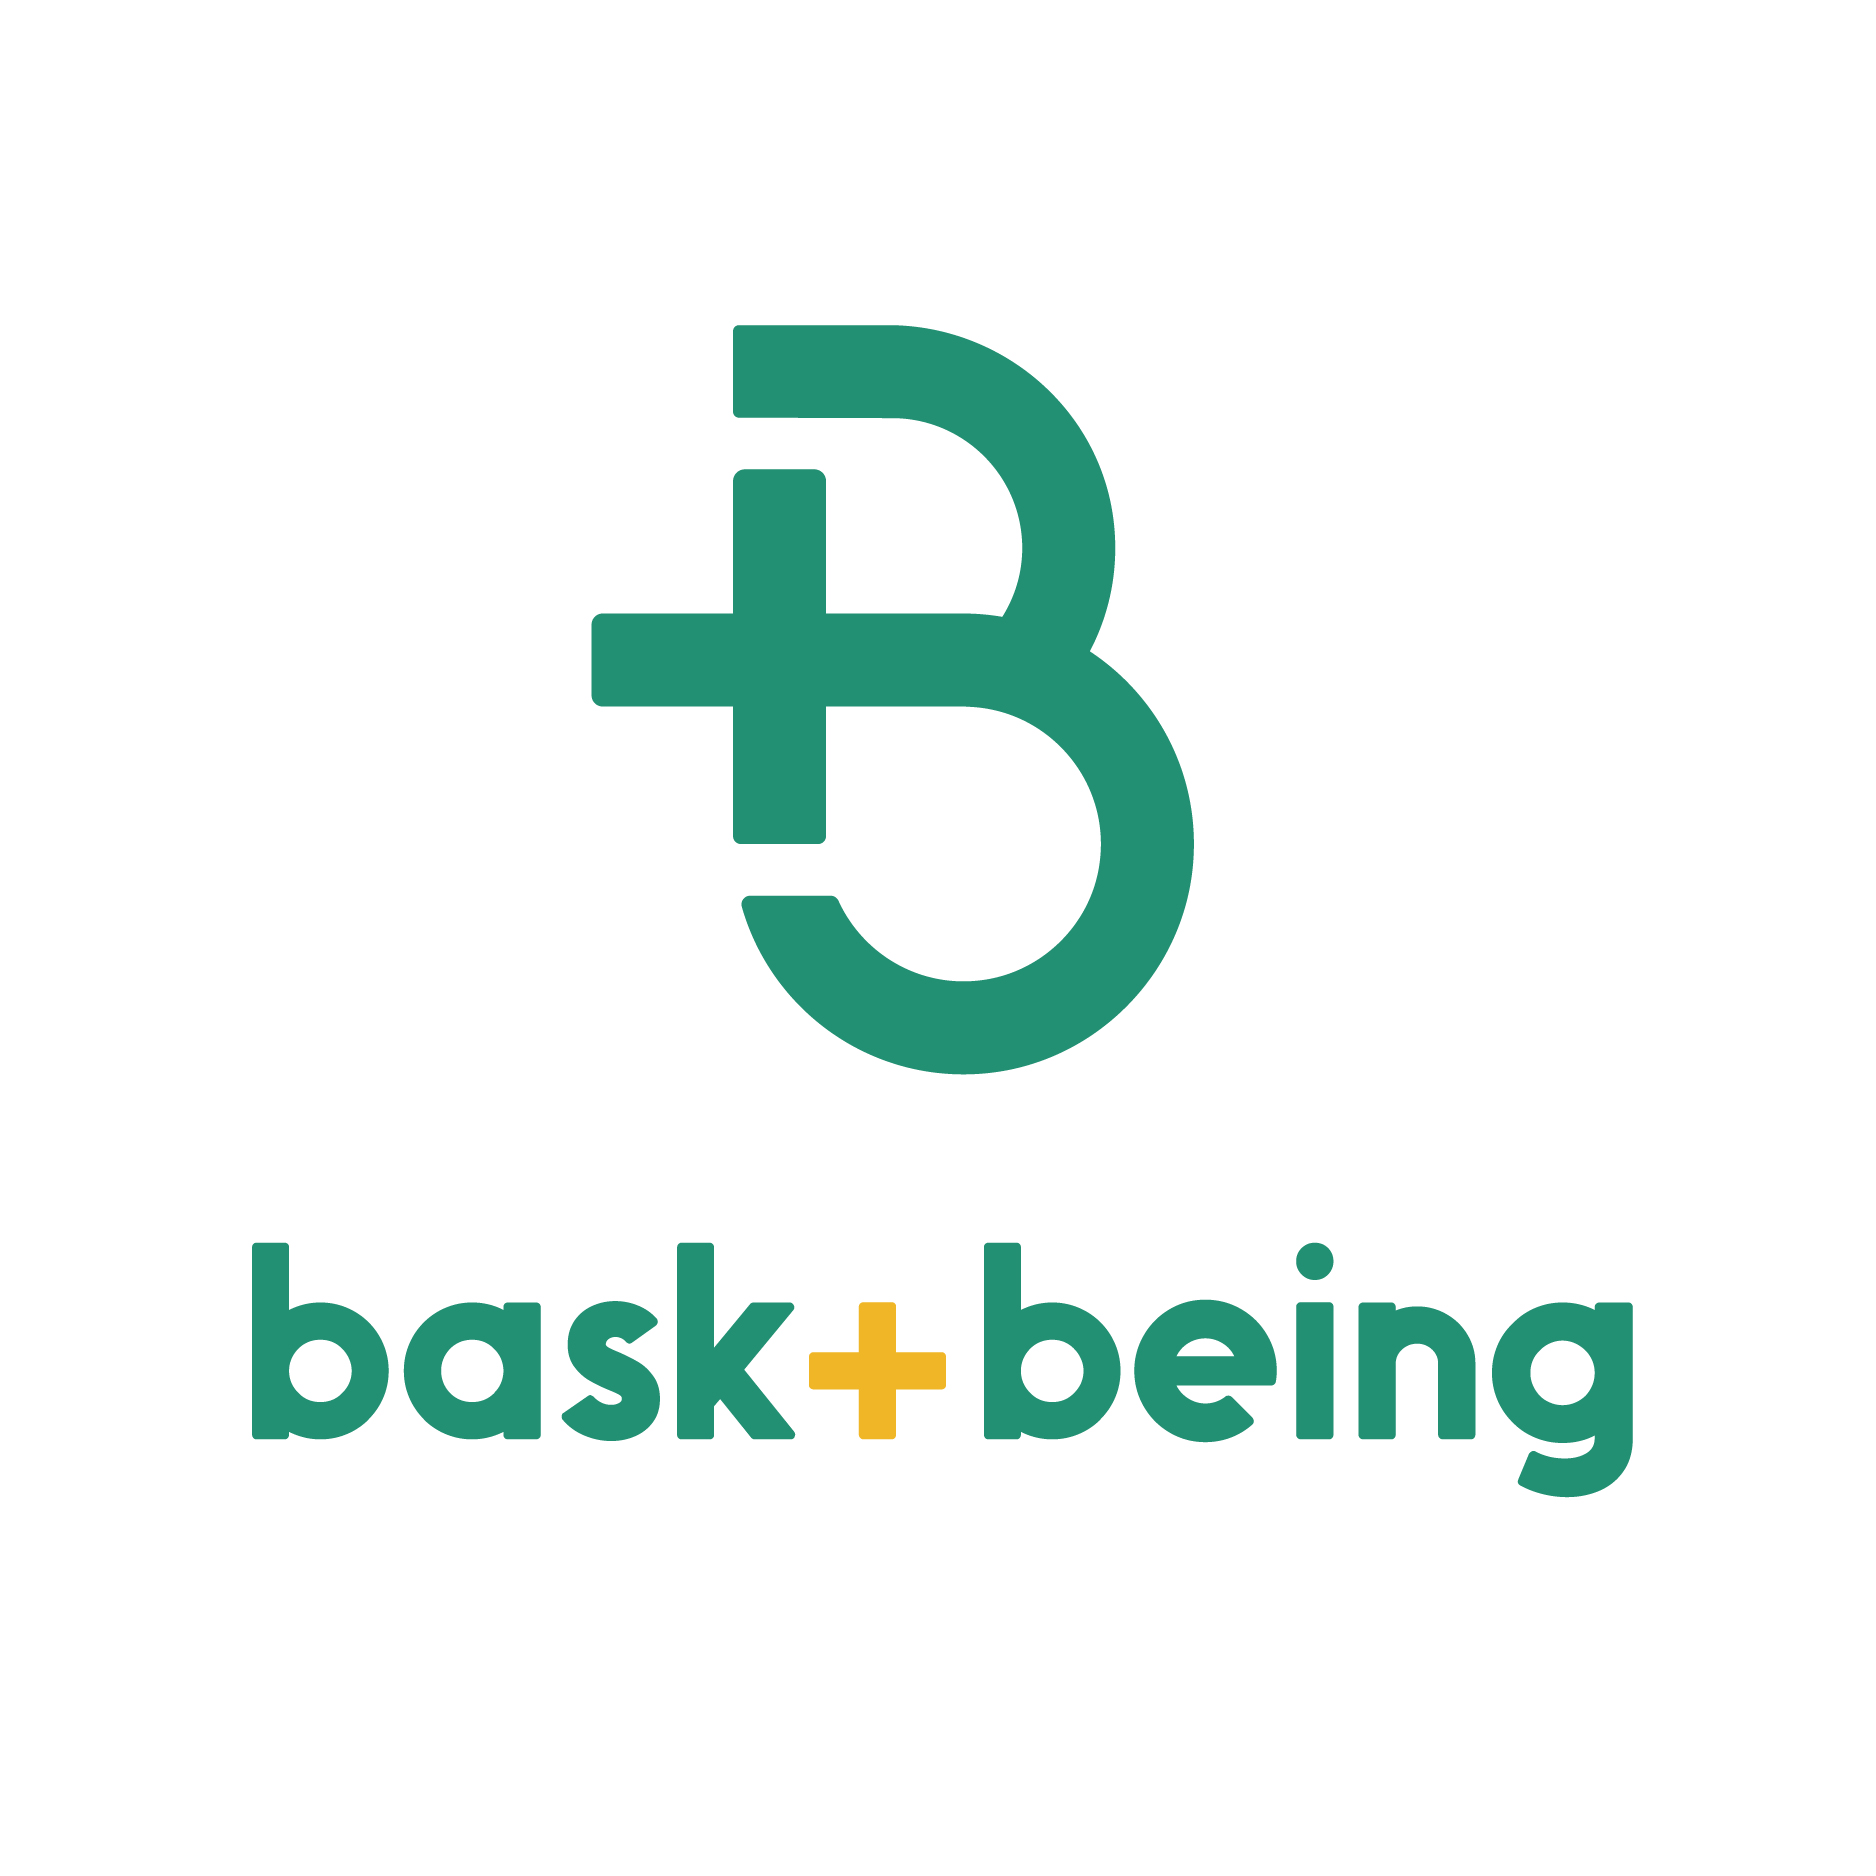 Bask + Being by Stellen Design  logo design by logo designer Stellen Design for your inspiration and for the worlds largest logo competition